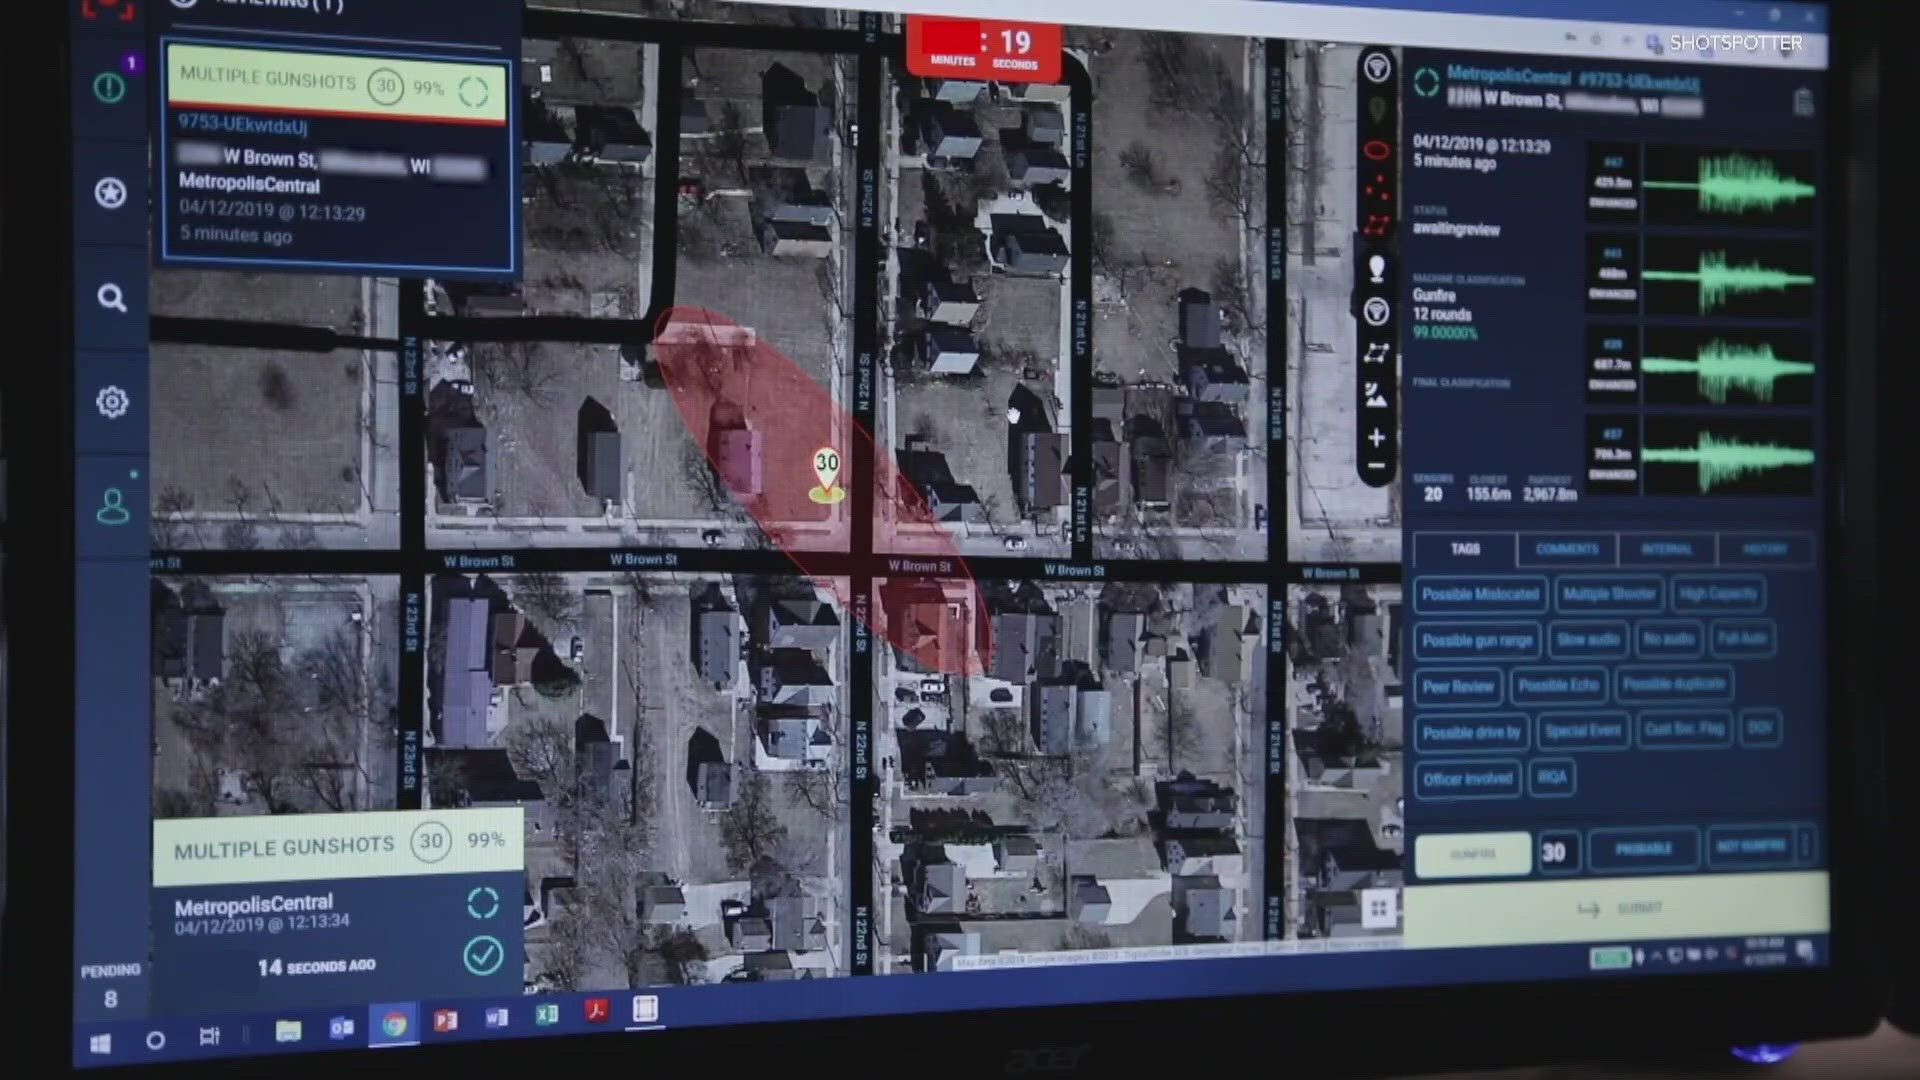 A report compiled by an "academic partner" and an IMPD working group found that gunshot detection technology led to the same amount of evidence as a 911 call.